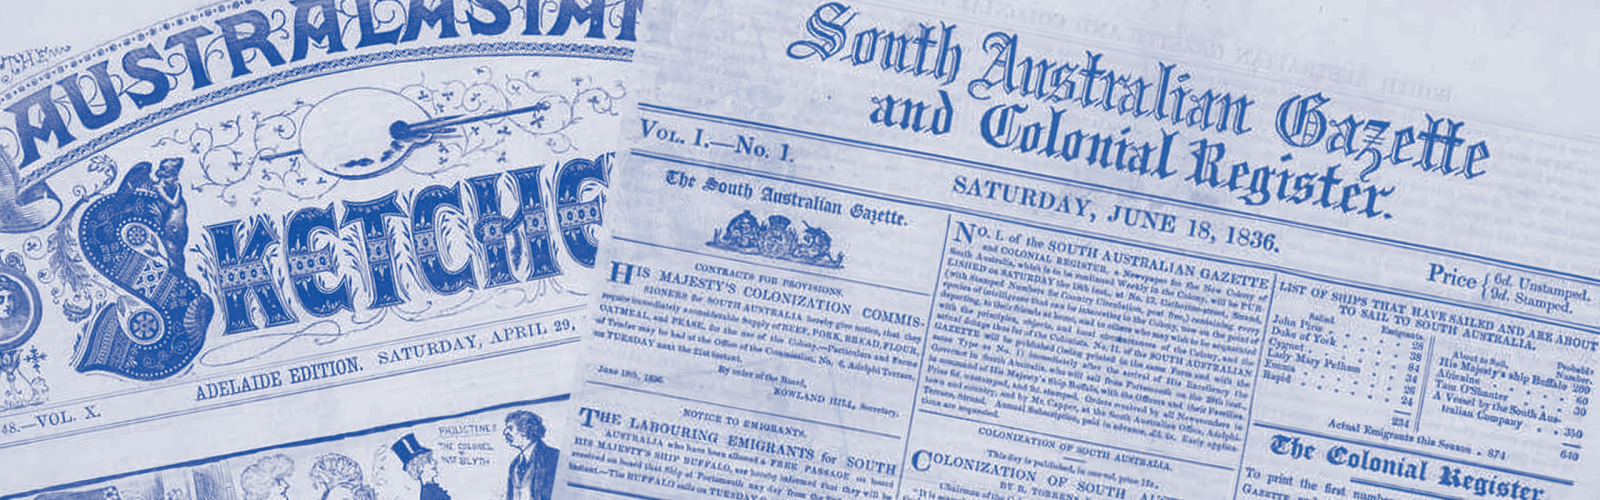 News machup featuring the South Australian Gazette 1836 and the Australasian Sketcher 1882